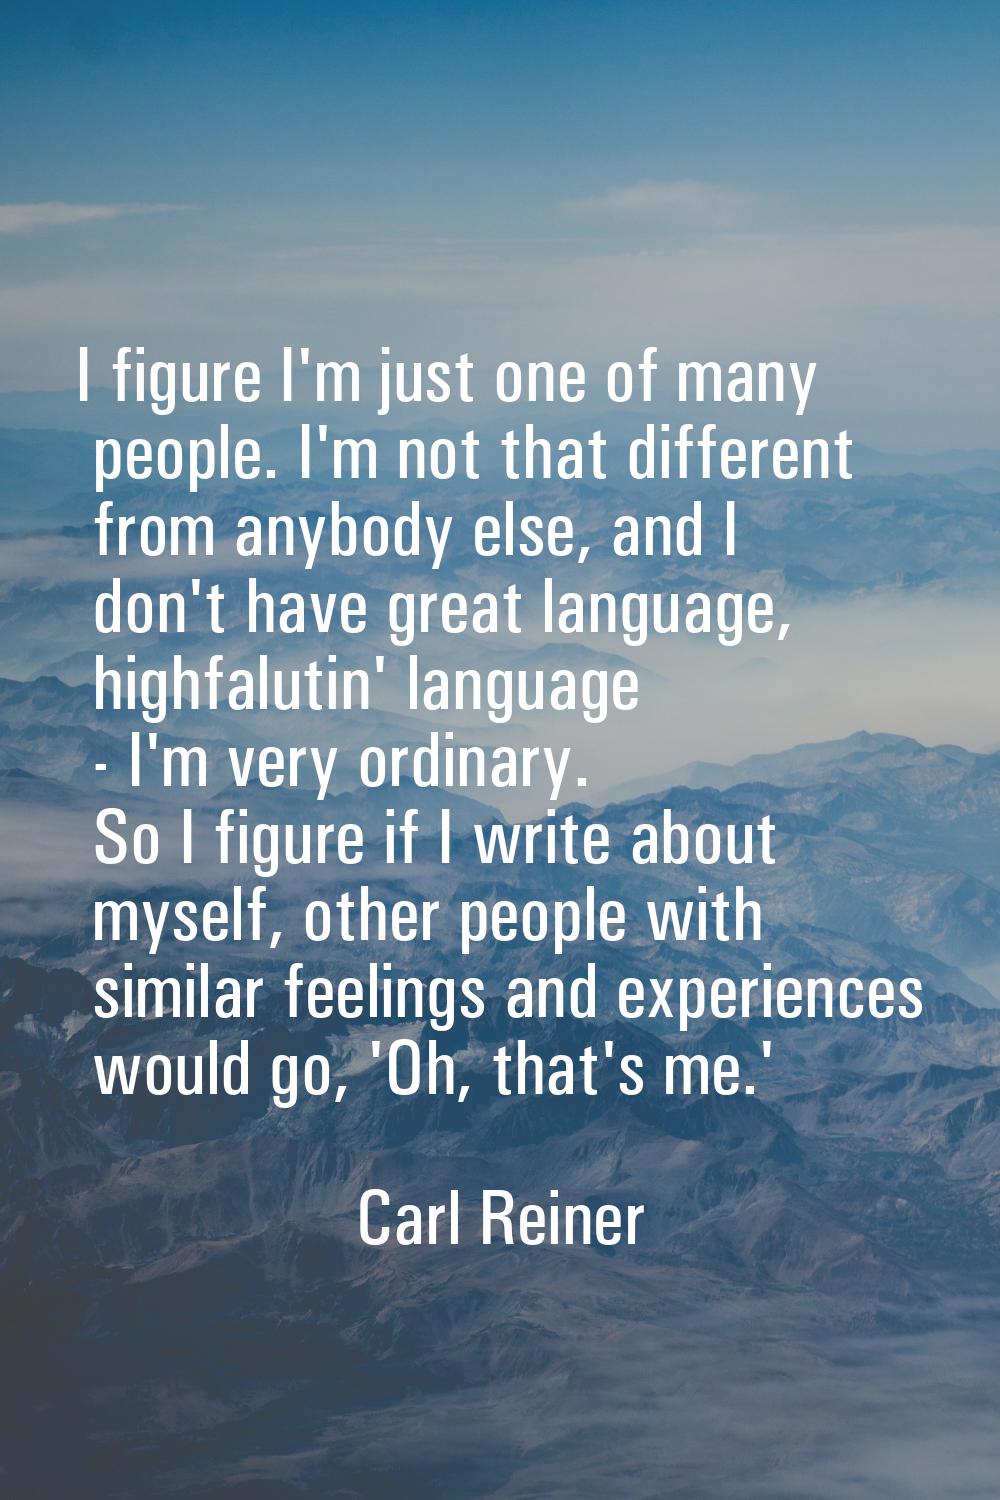 I figure I'm just one of many people. I'm not that different from anybody else, and I don't have gr